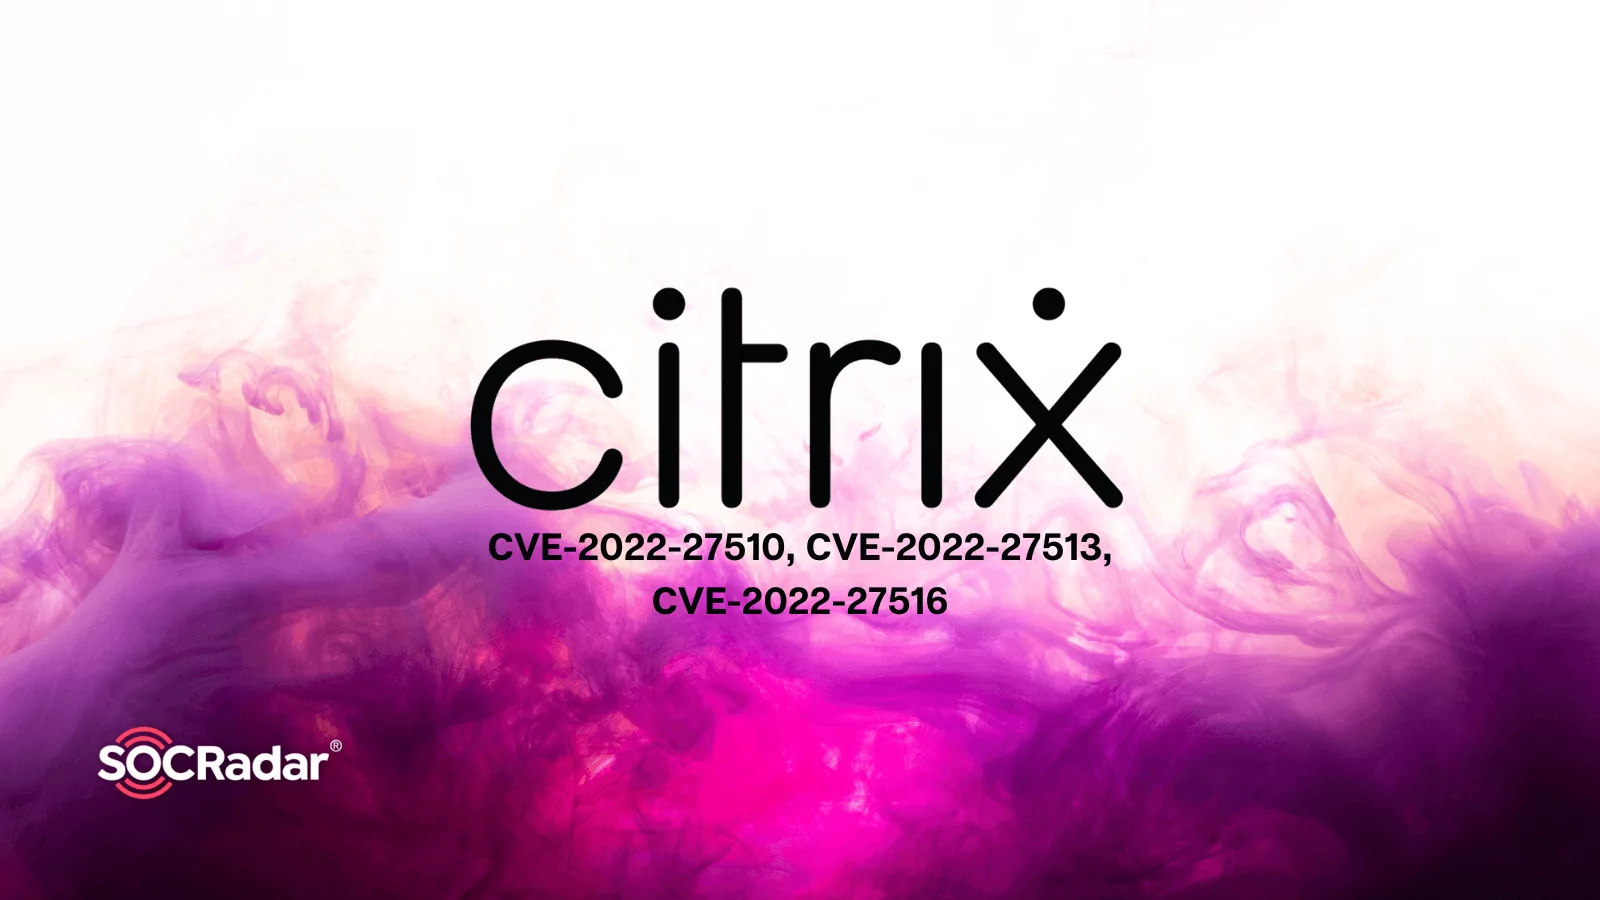 All You Need To Know About the Critical Citrix Vulnerabilities